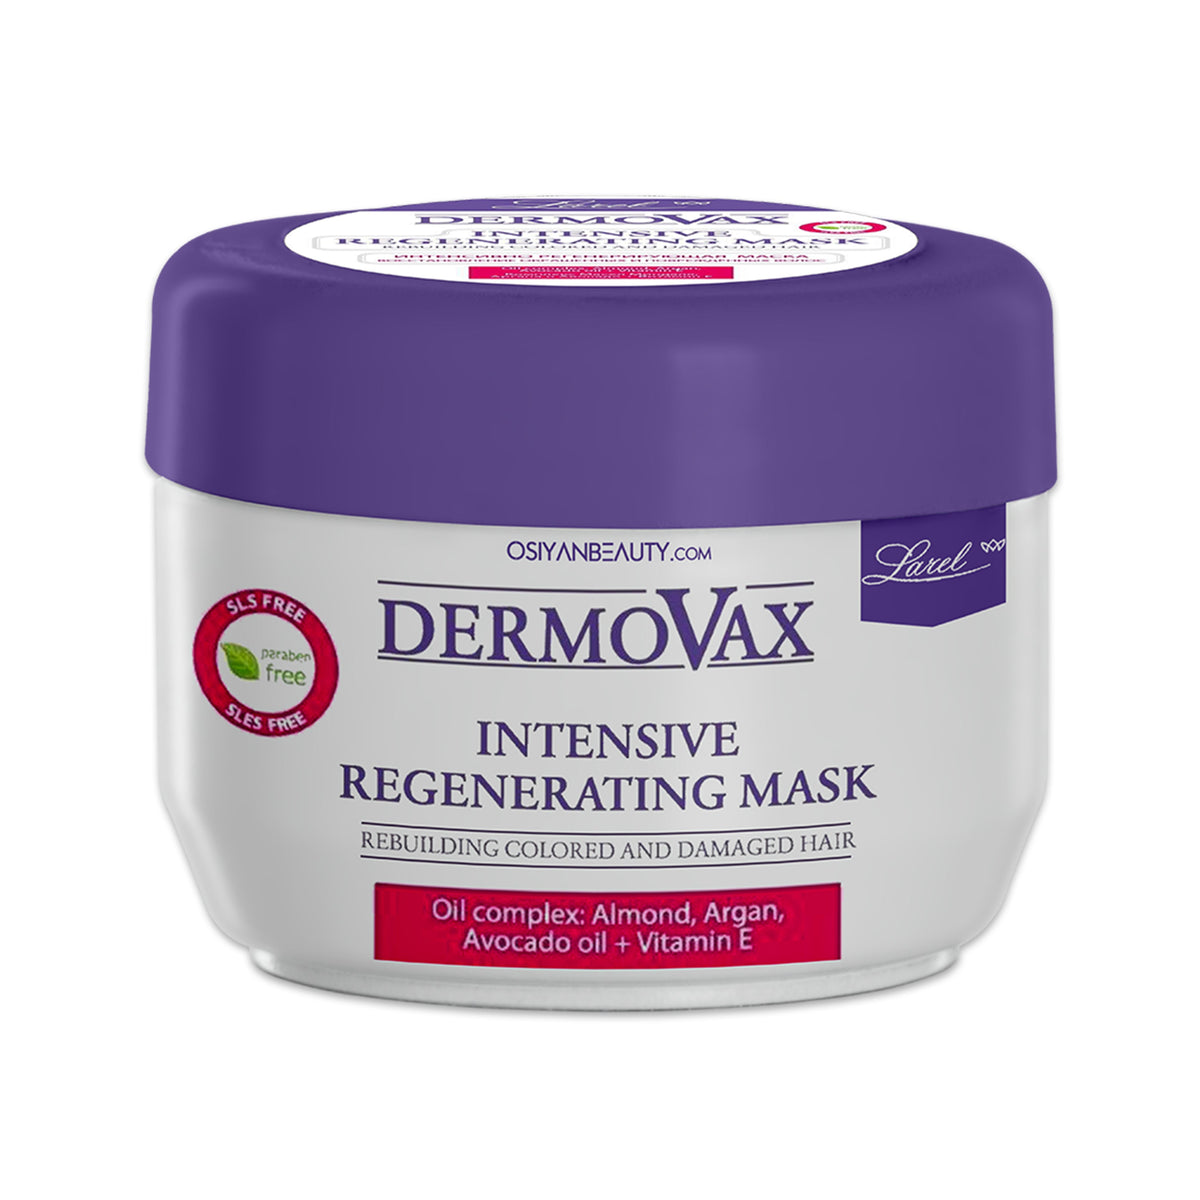 Dermovax Intensiv Regenerating Mask Reenerating For colored and damaged hair(made in Europe)